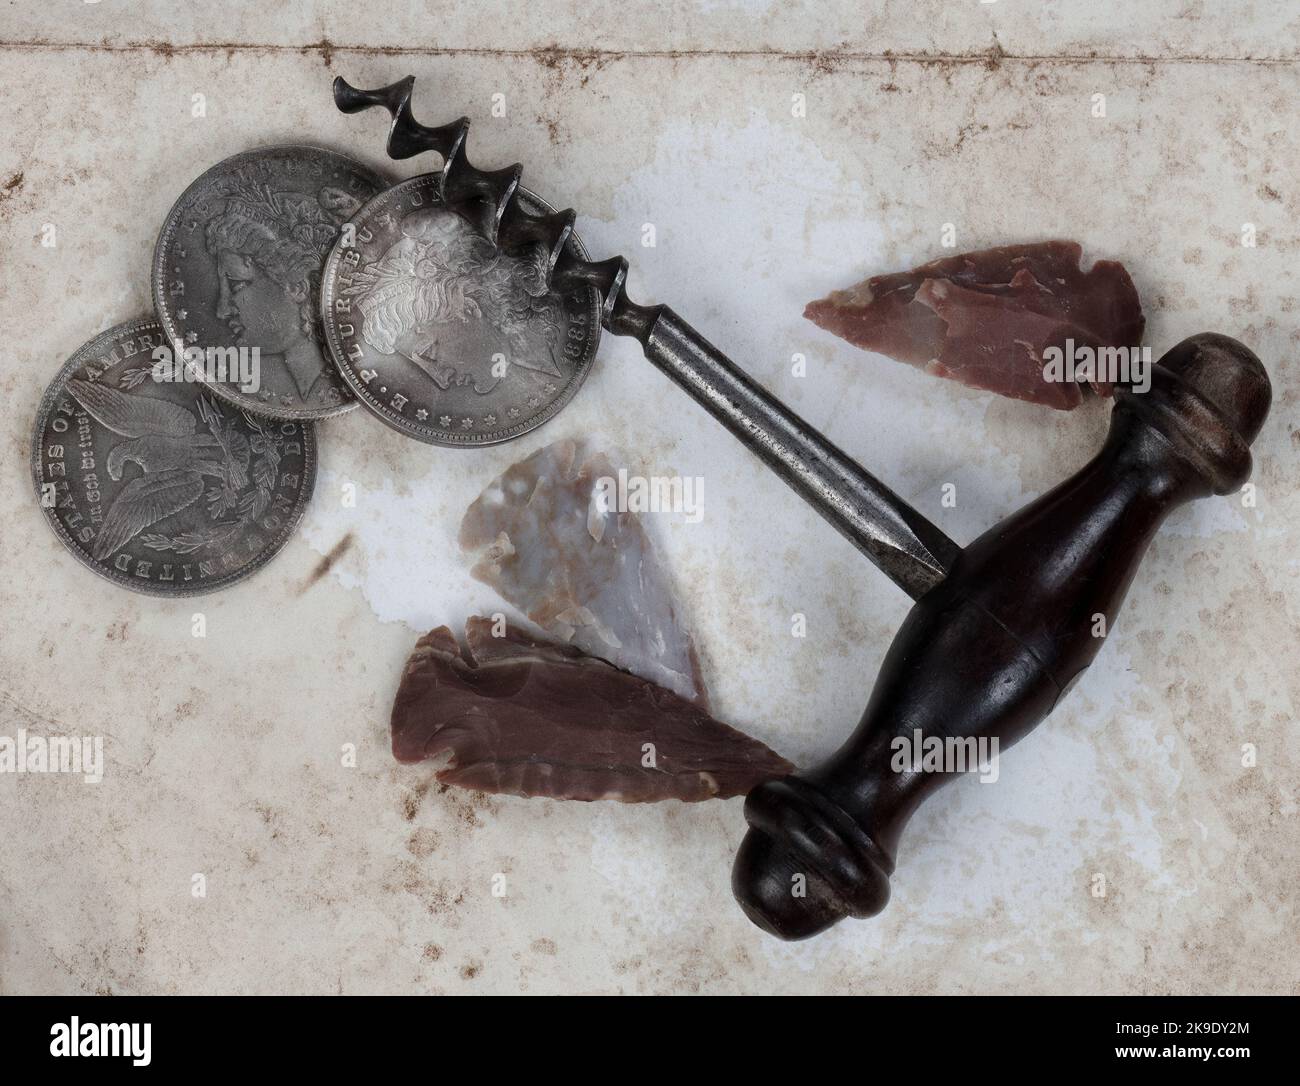 Unique vintage collection of antique corkscrew, native American arrowheads, and silver dollar coins on fade paper background in close up view Stock Photo